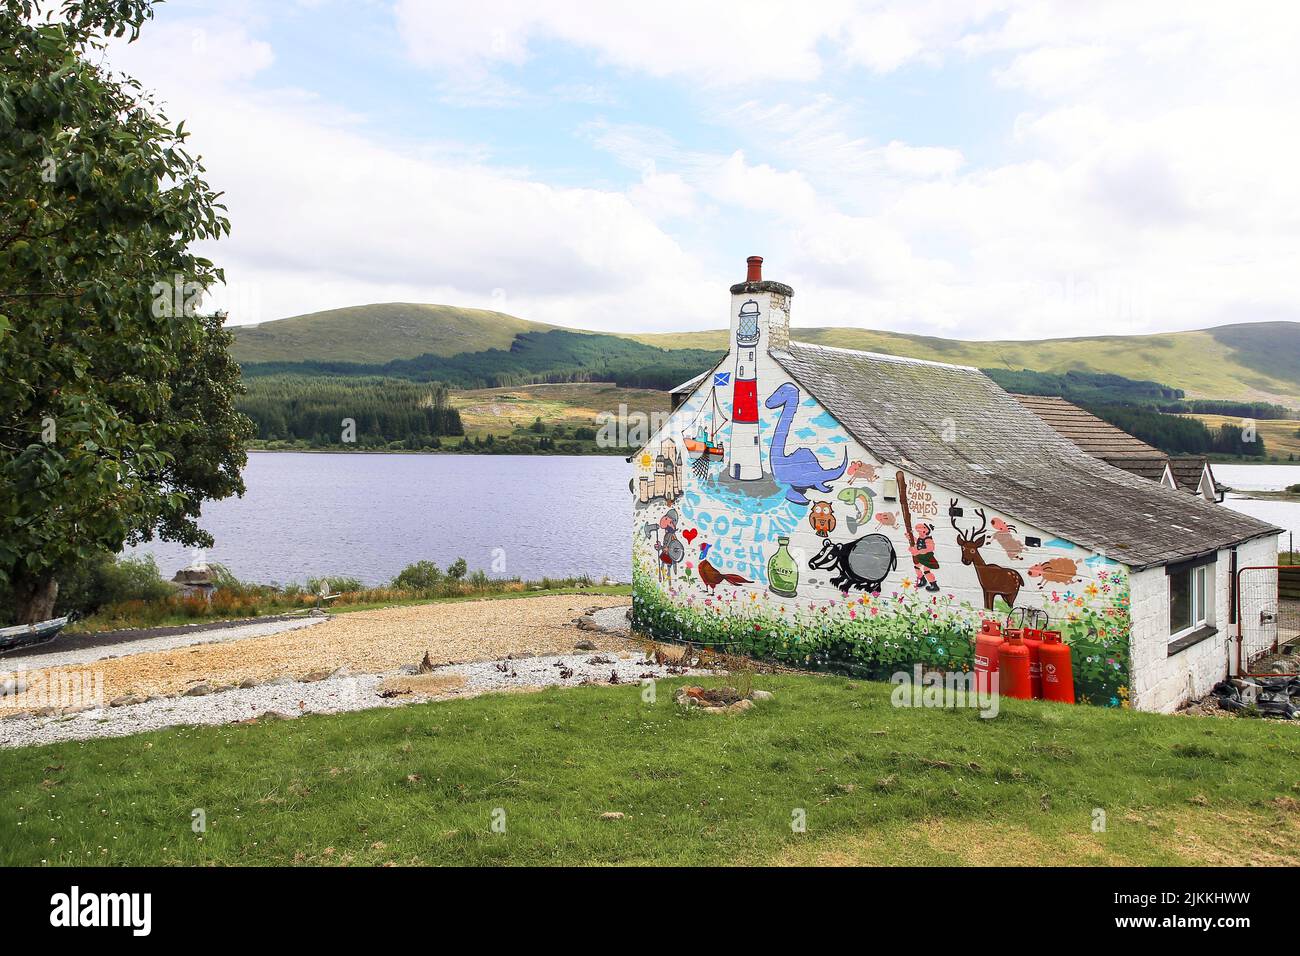 The decorated gable wall of Craigmalloch Lodge showing different aspects of Scotland, on the shores of Loch Doon, near Galloway Forrest,  Scotland Stock Photo